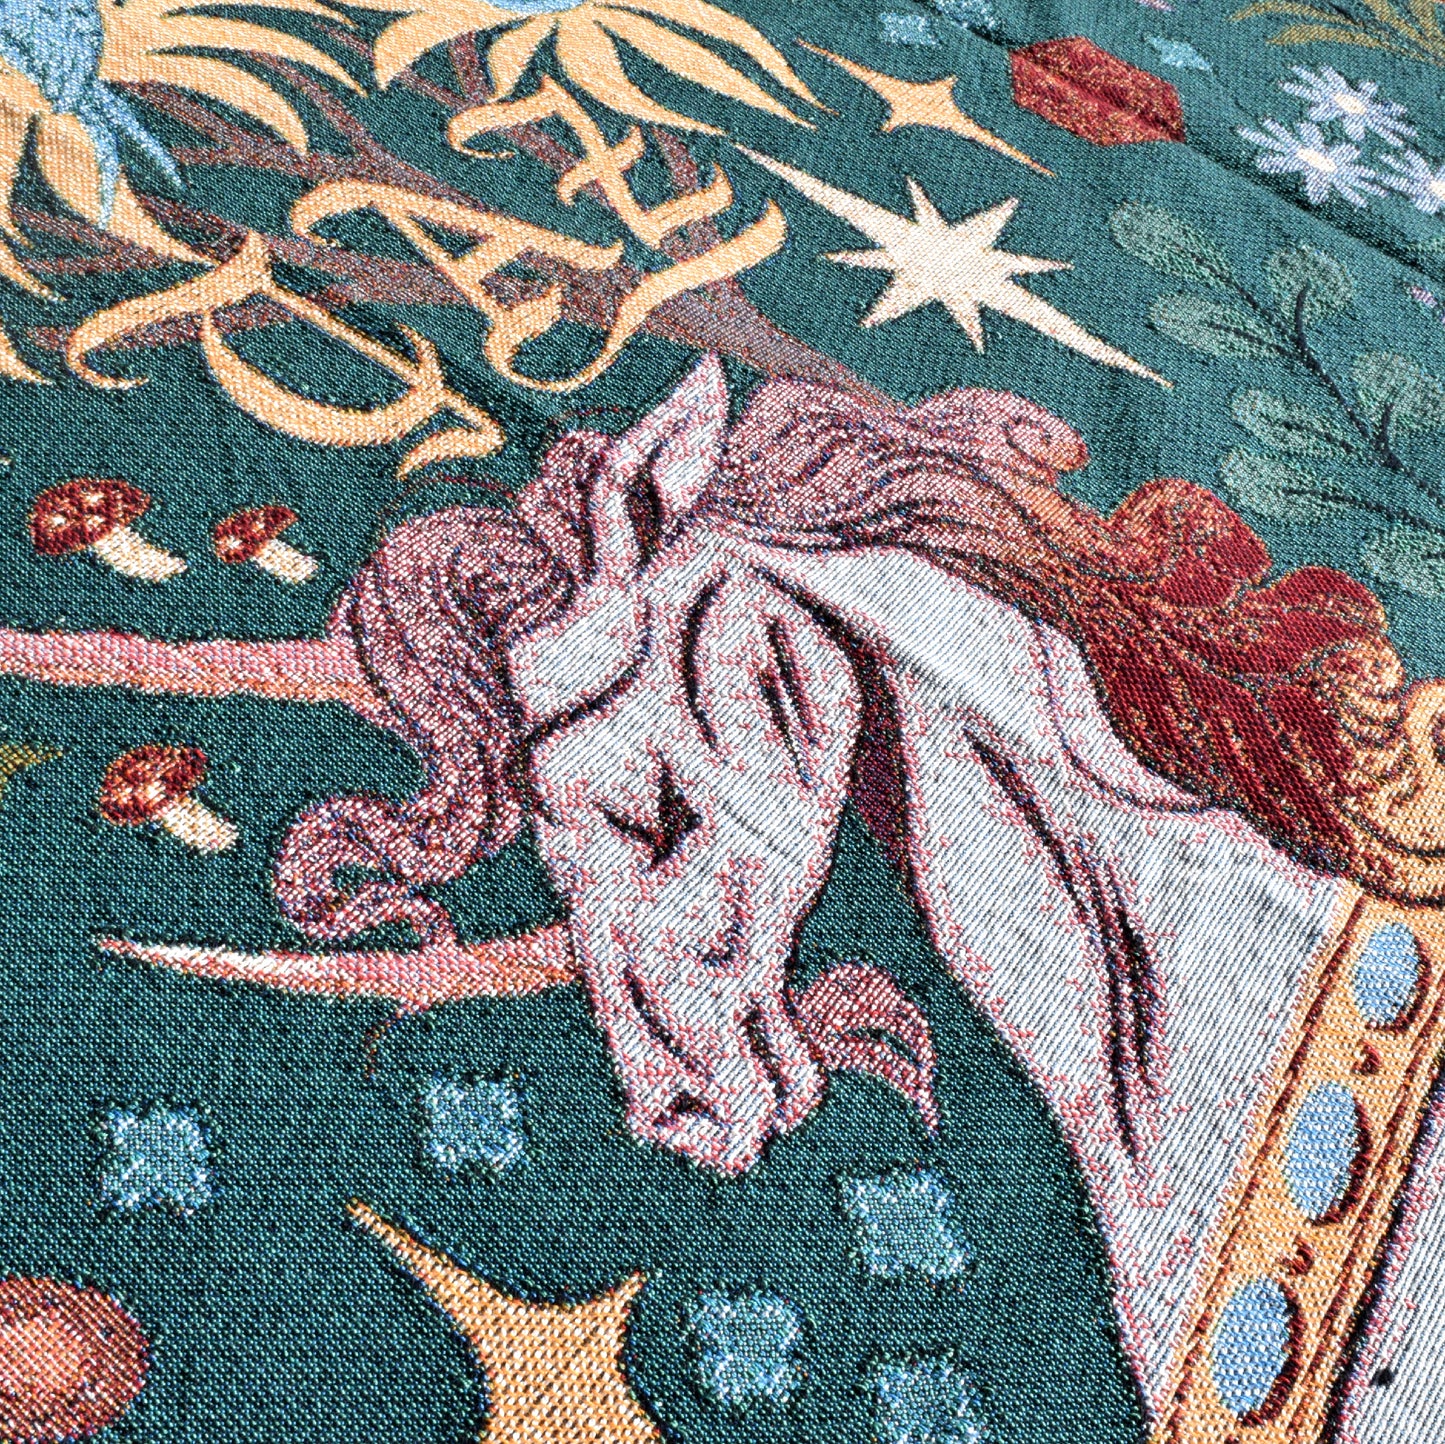 closeup of a deep green woven blanket with gold stars, red and white mushrooms, and flowers on it. in the center, a unicorn's head with two long reddish horns.